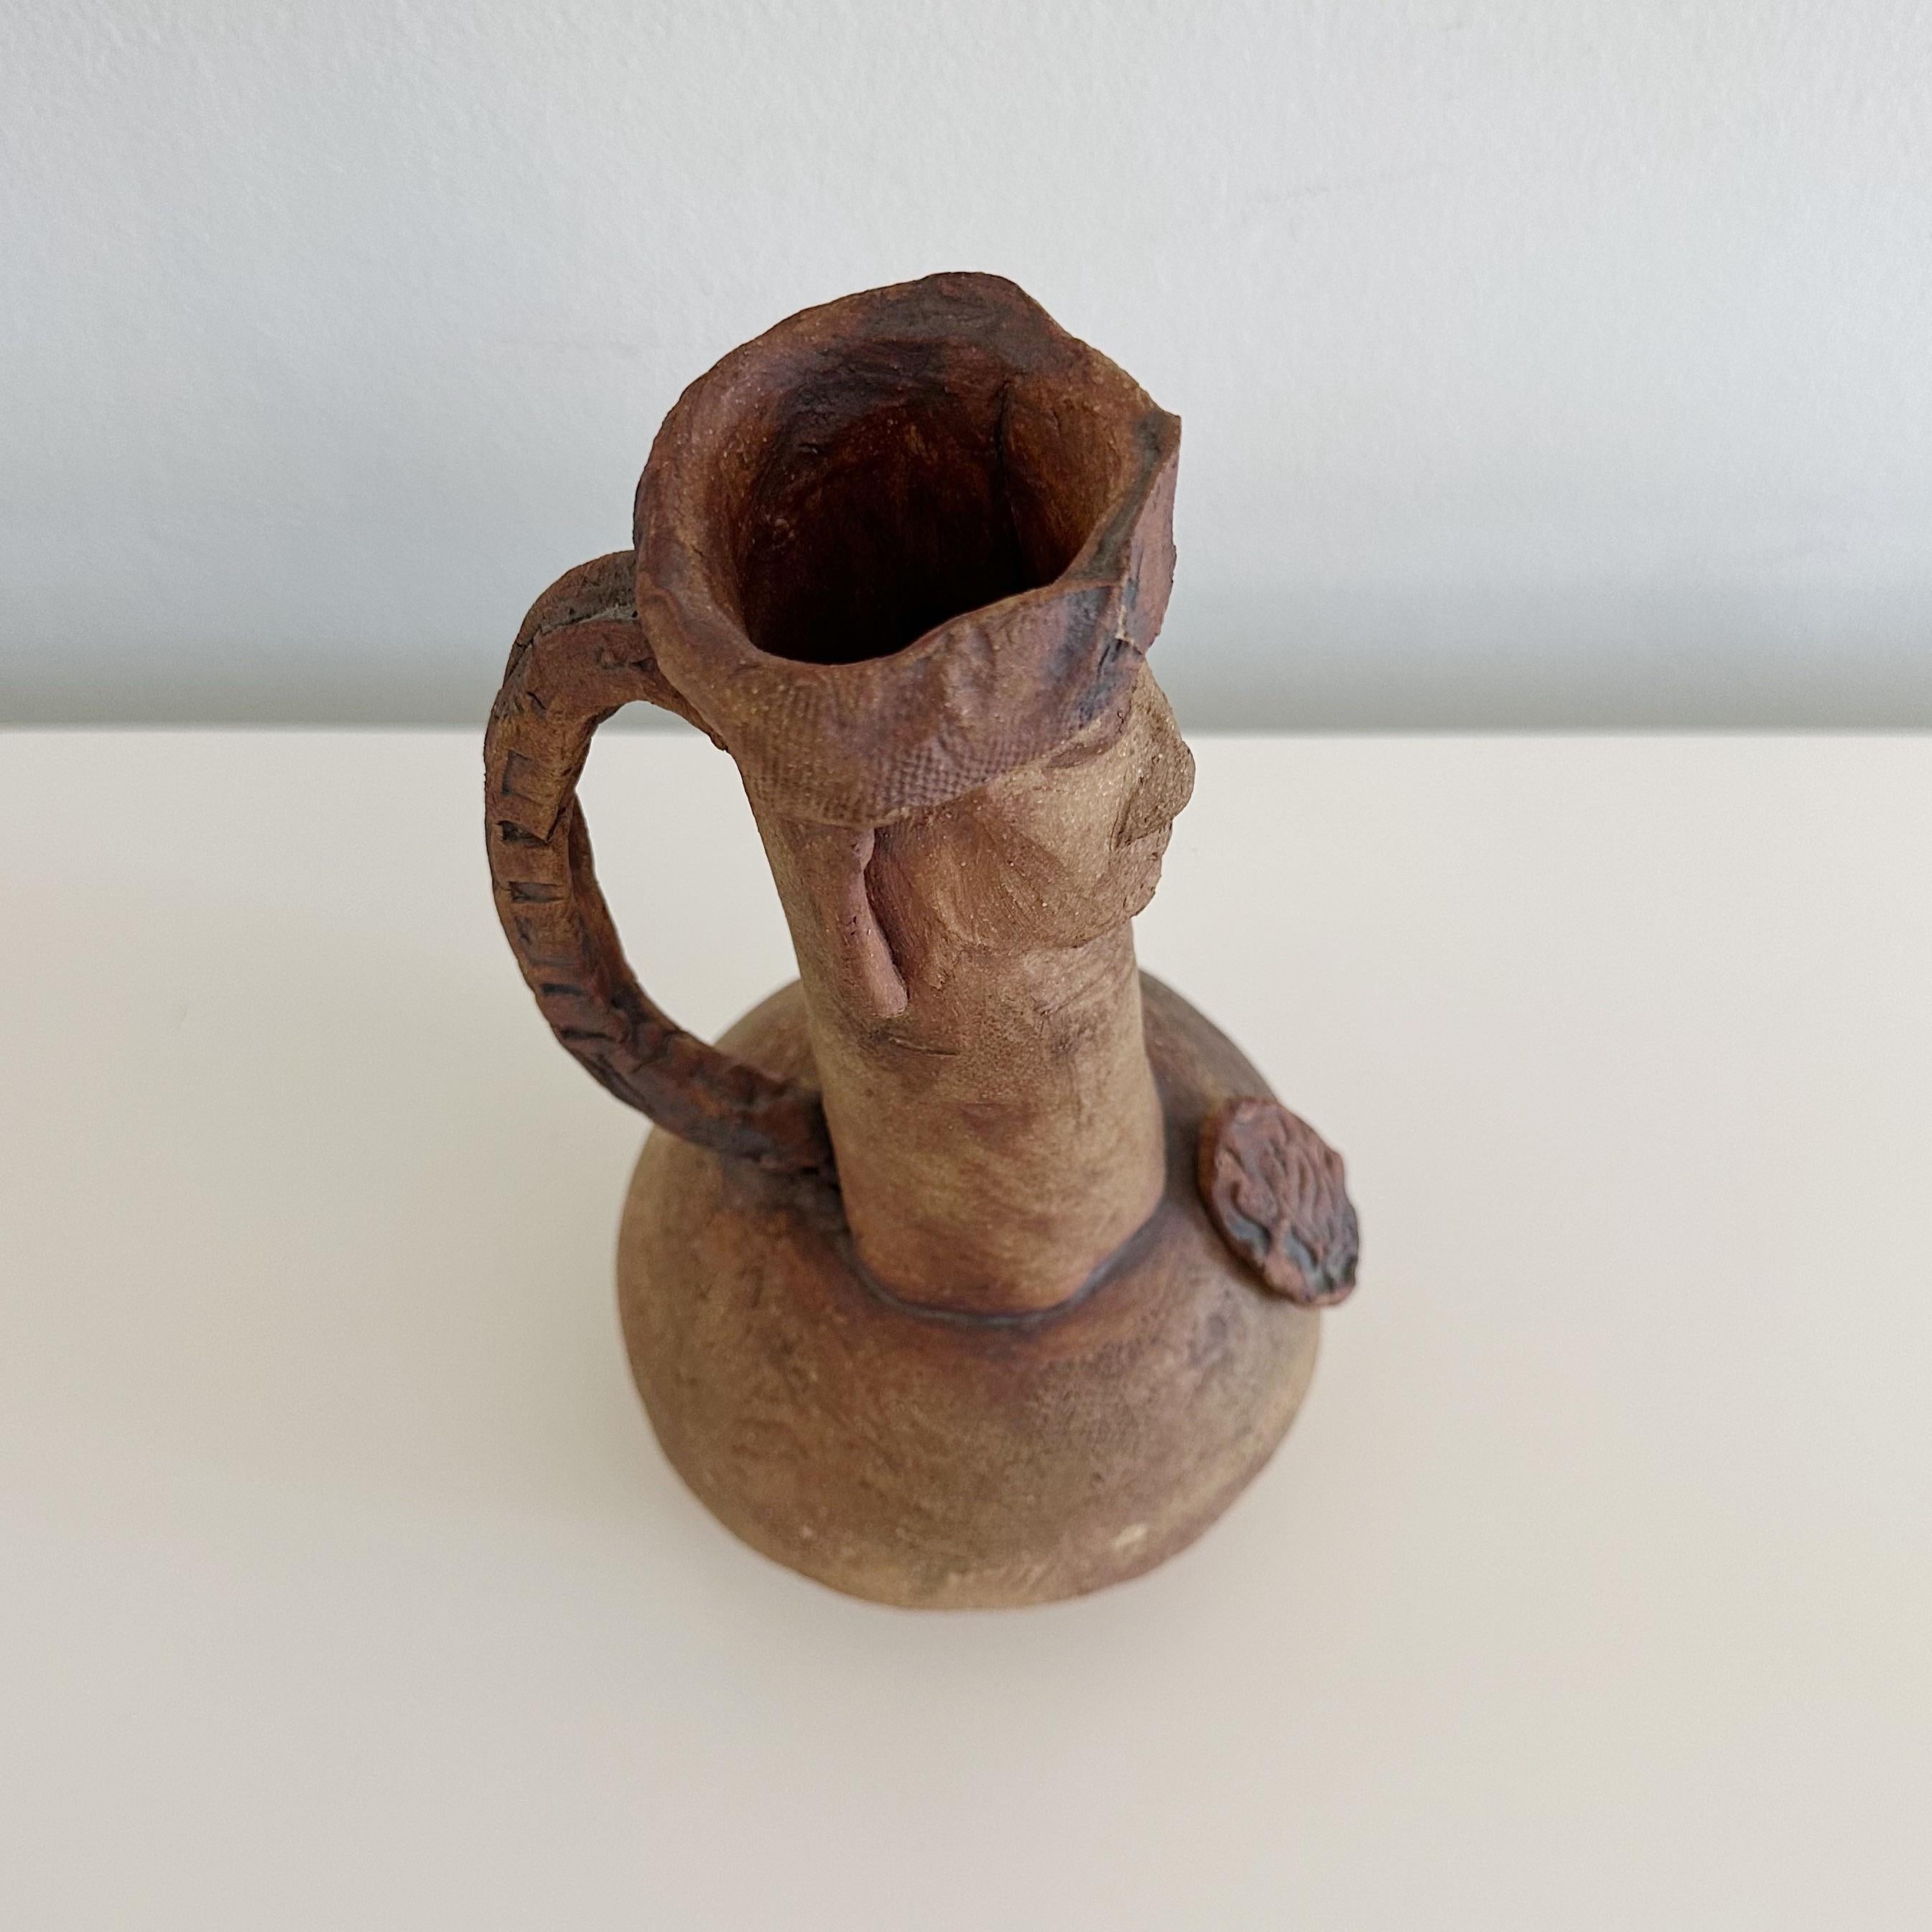 Presenting a unique studio pottery figural handled jug, pitcher or could also be used as a vase. Created by the renowned sculptor Ruth Joffa. This particular signed piece, comes with a distinguished provenance, having been acquired directly from the